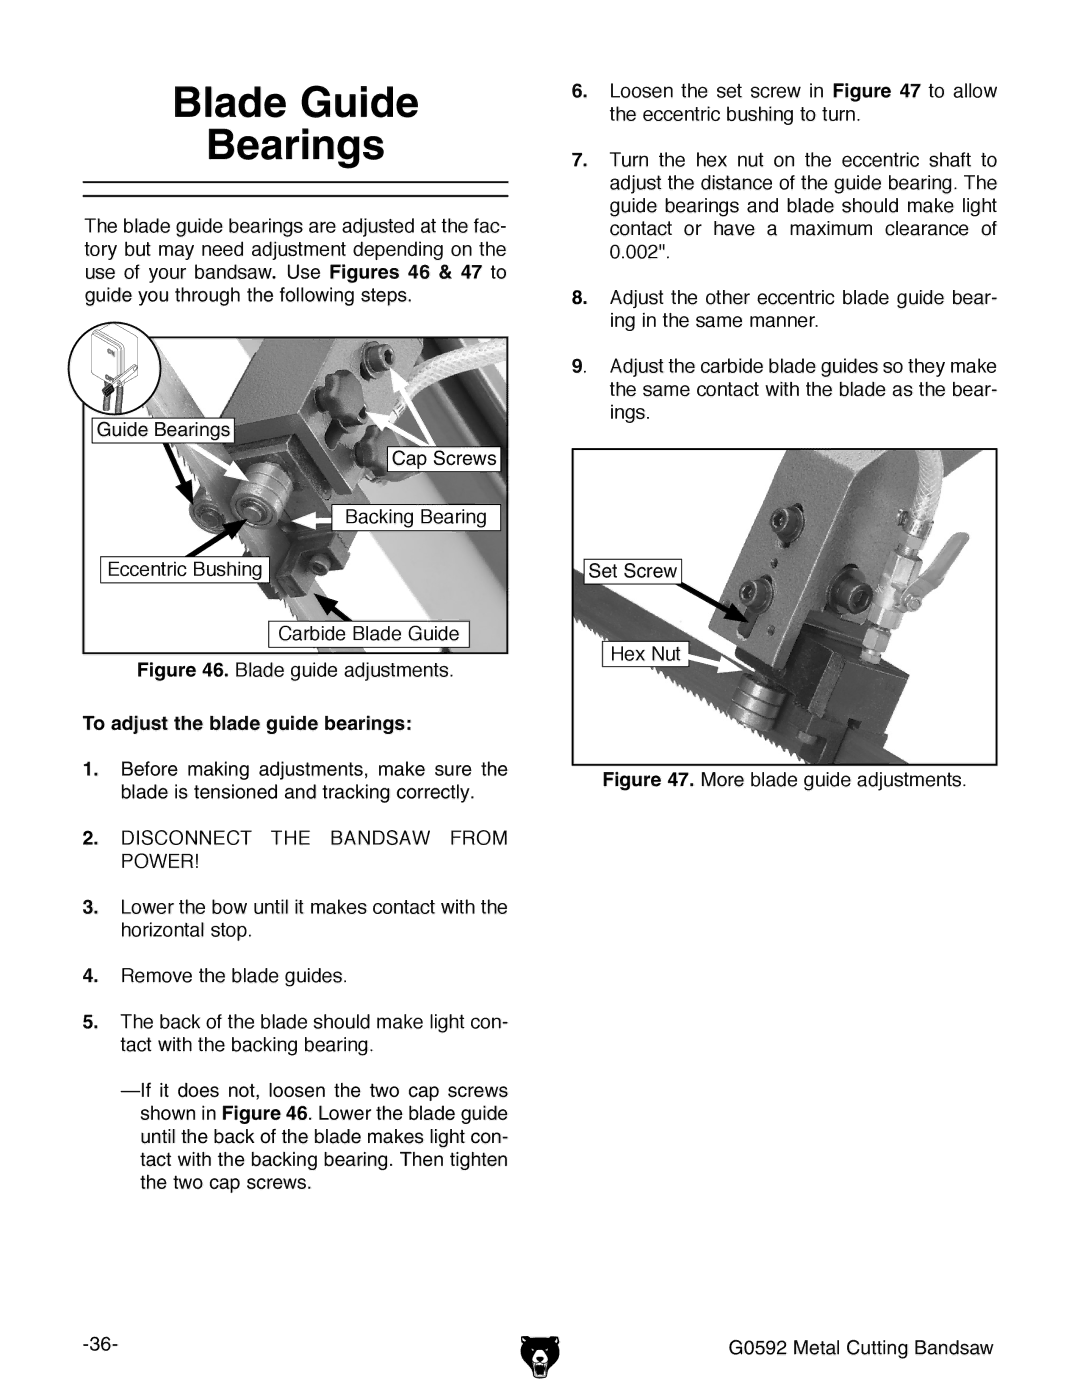 Grizzly G0592 owner manual Blade Guide Bearings, To adjust the blade guide bearings 